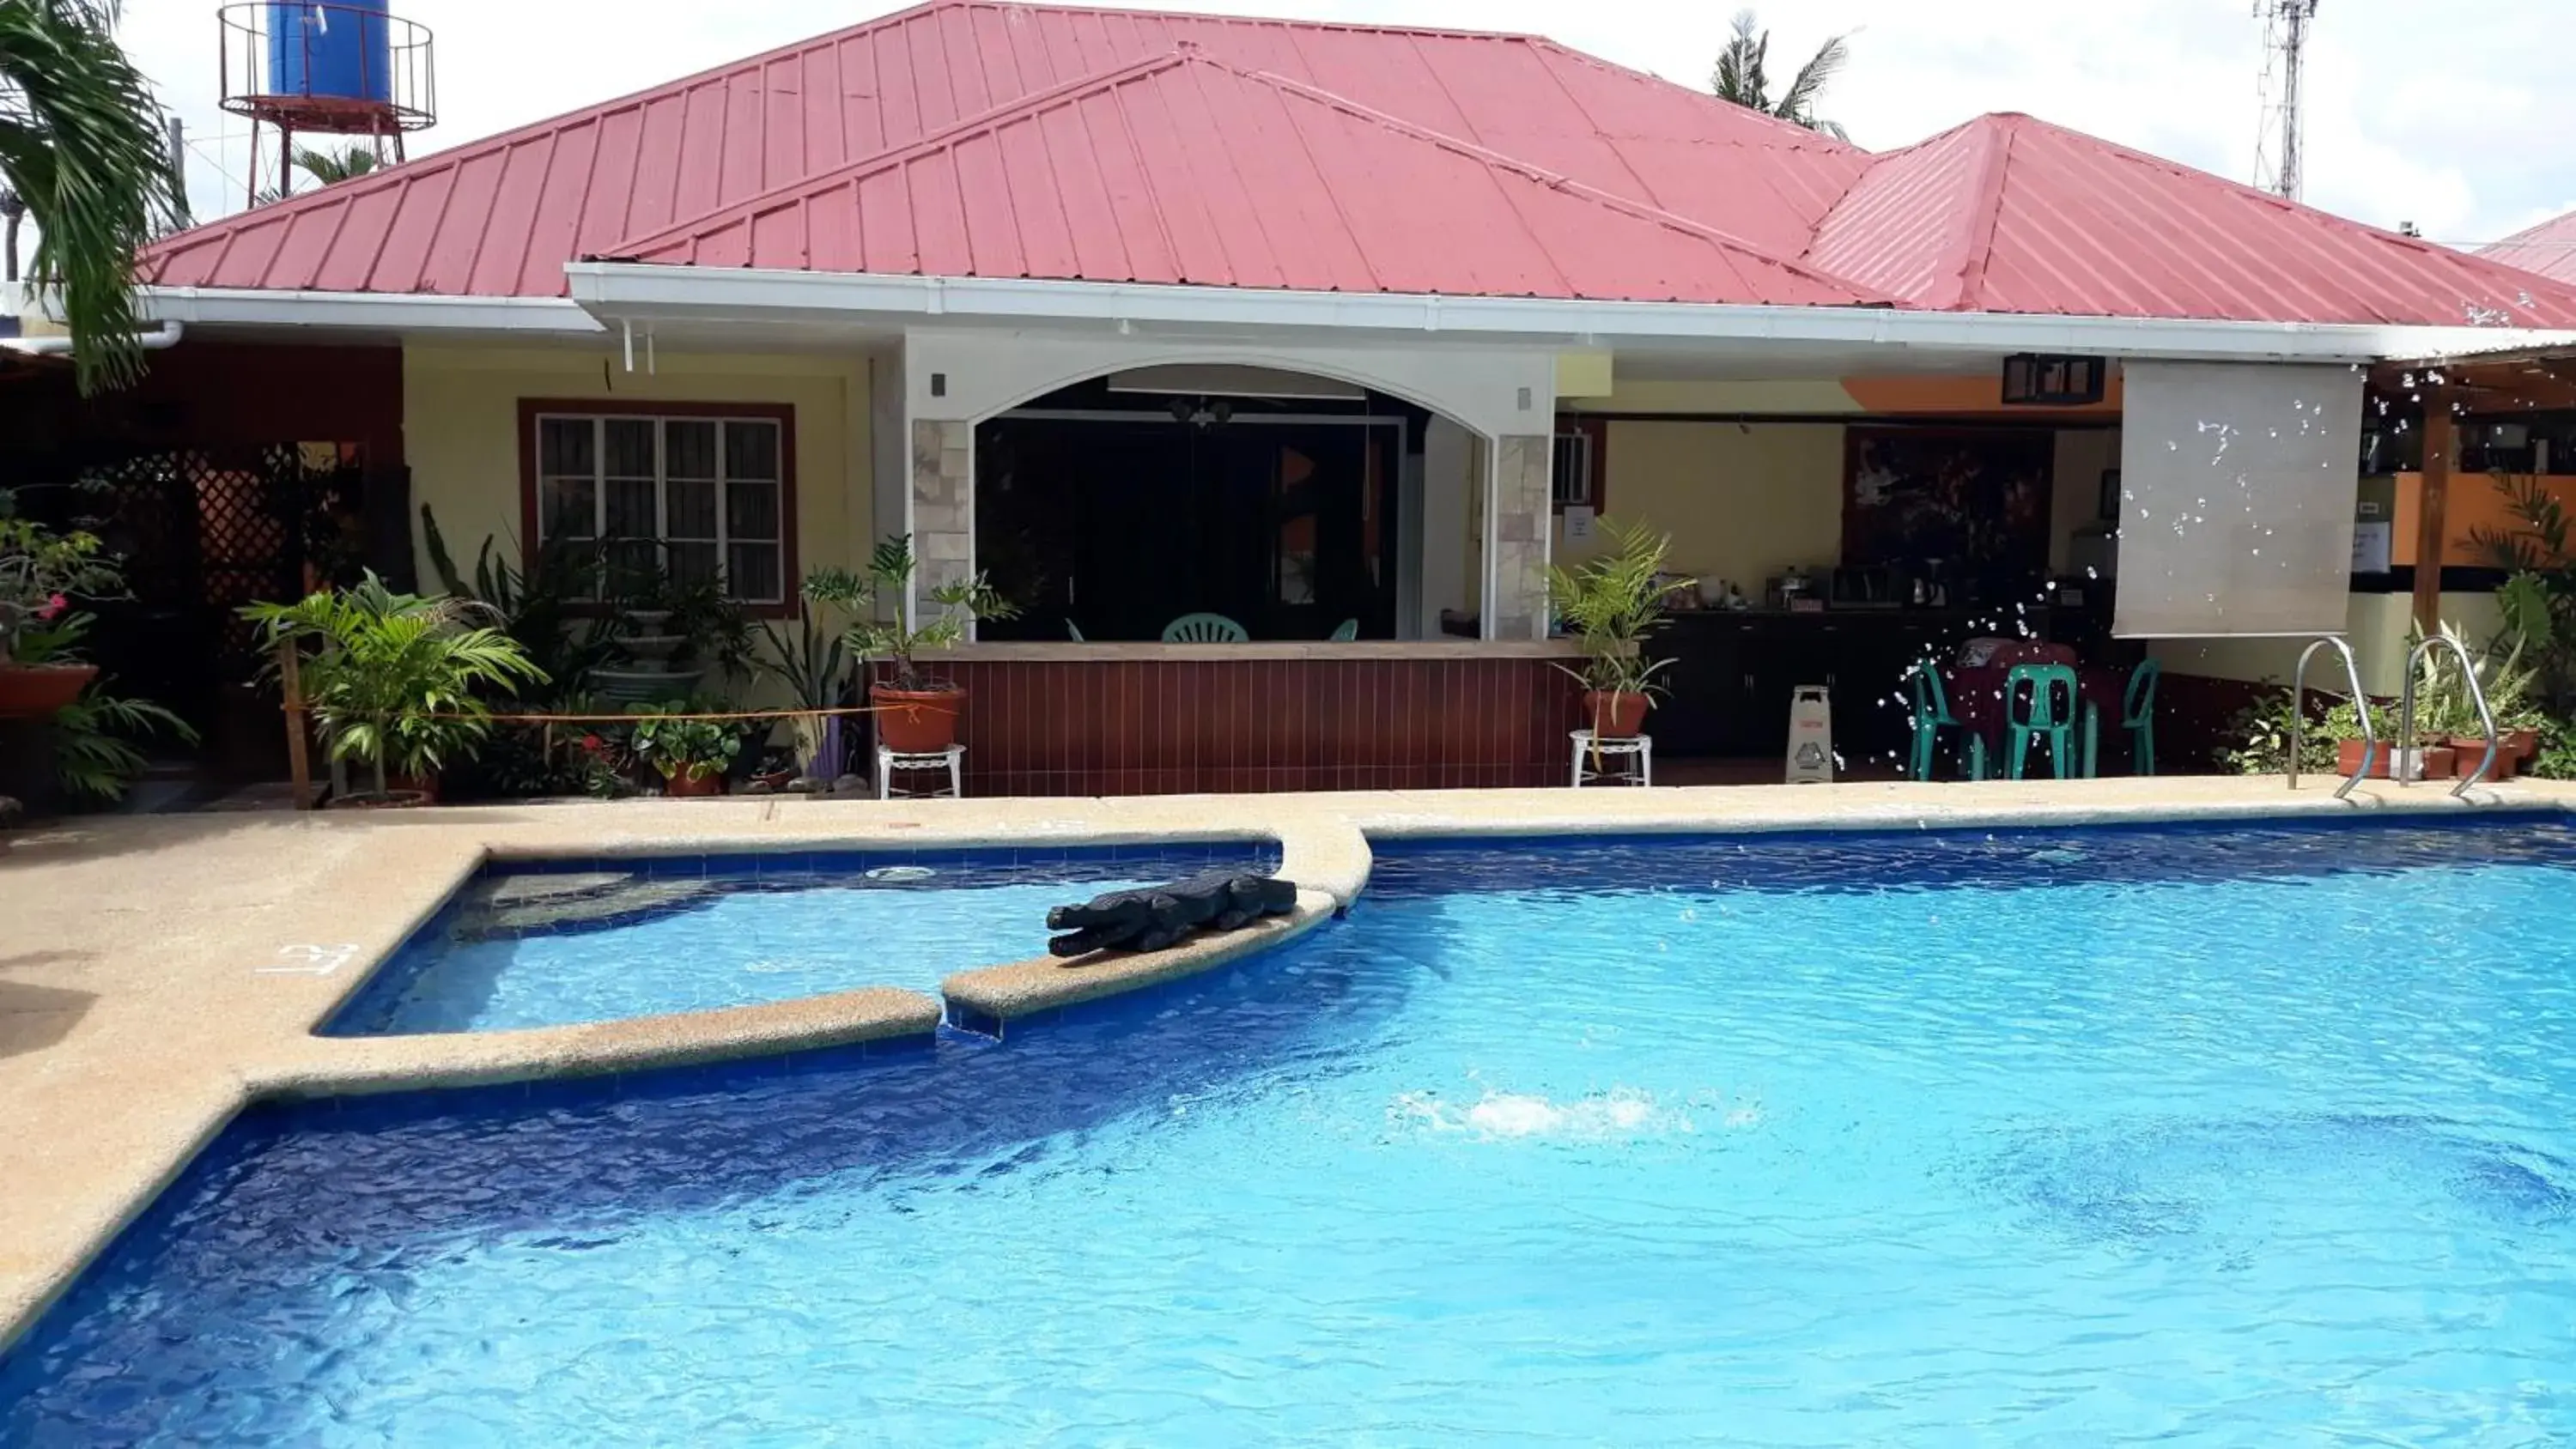 Property building, Swimming Pool in Citadel Bed And Breakfast